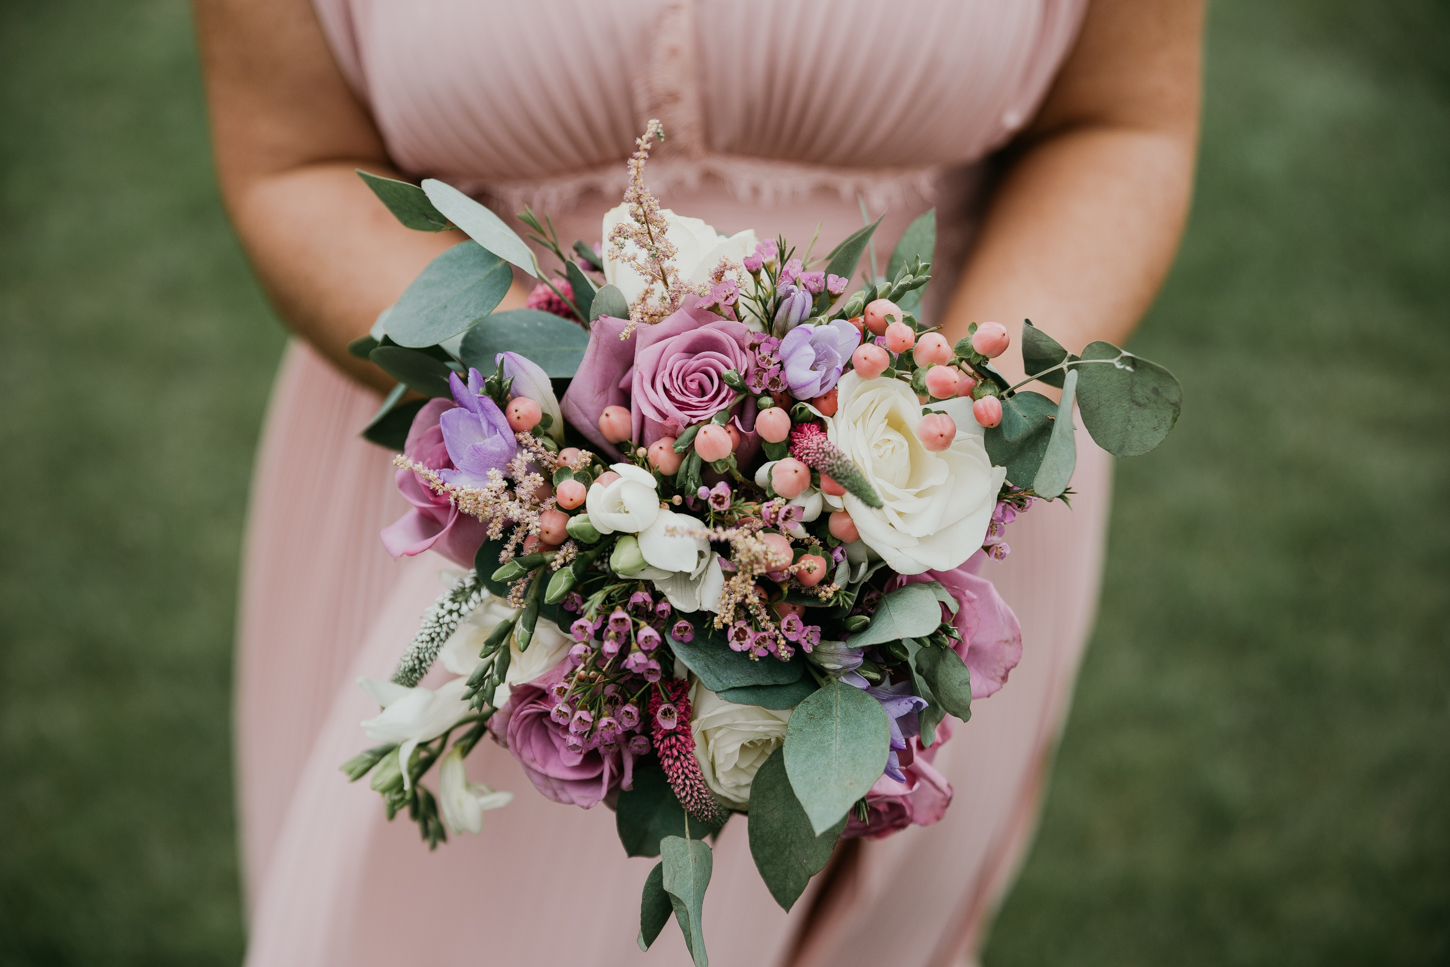 Wedding bouquet. how to choose what size for oyur wedding